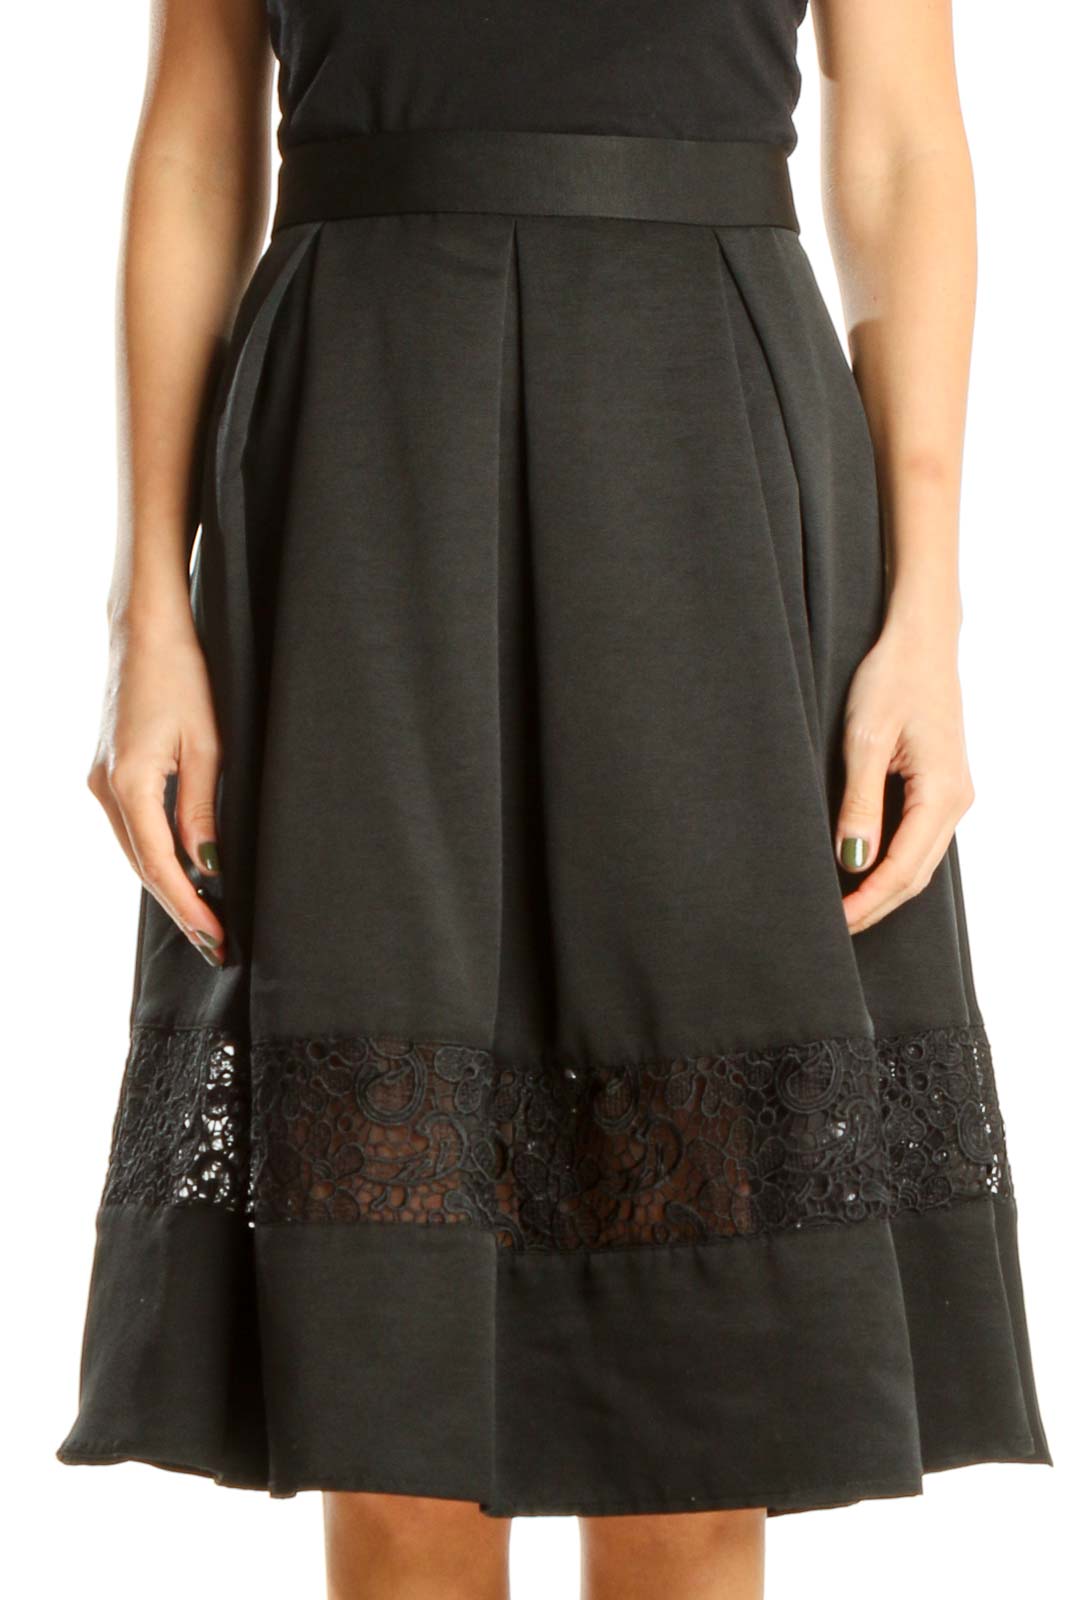 Black Retro Pleated Skirt with Lace Detail Front